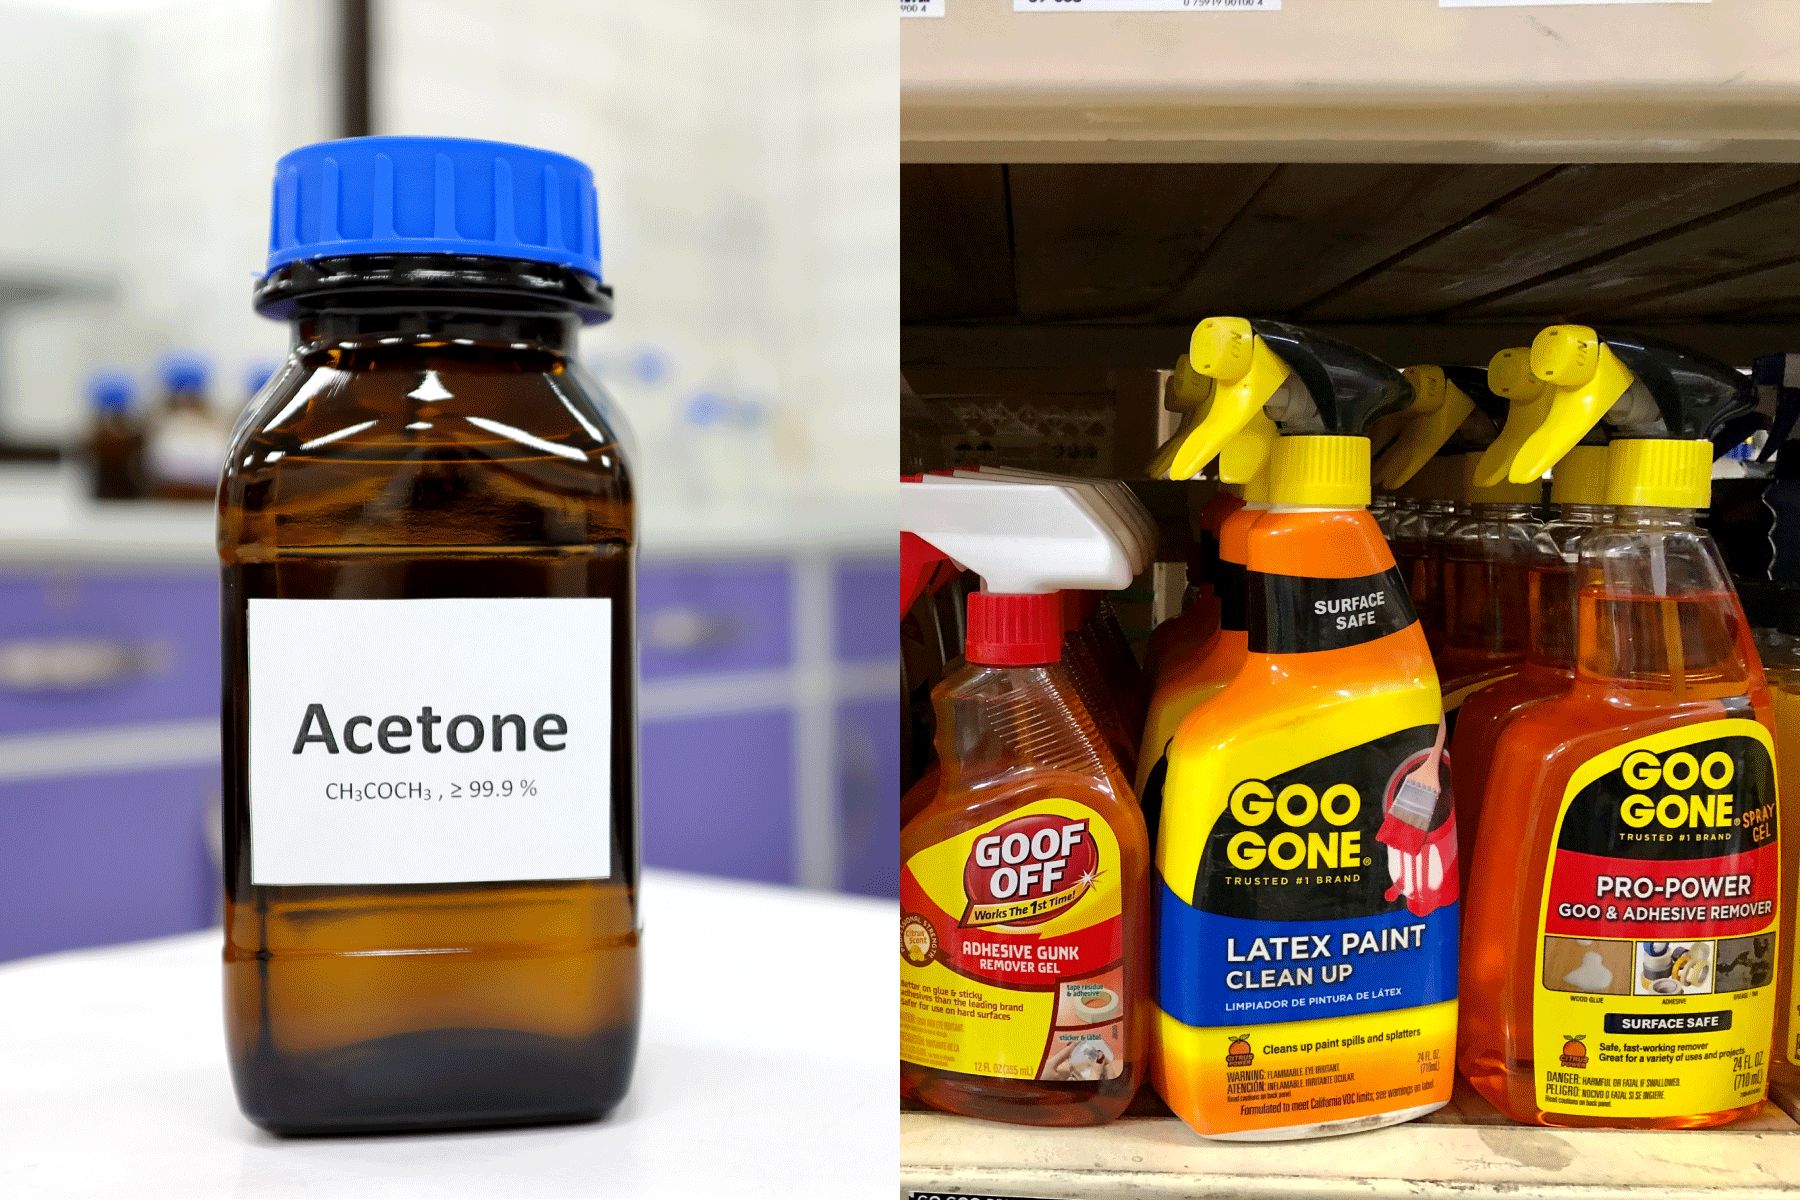 A collaged photo of an Acetone and Goo Gone products